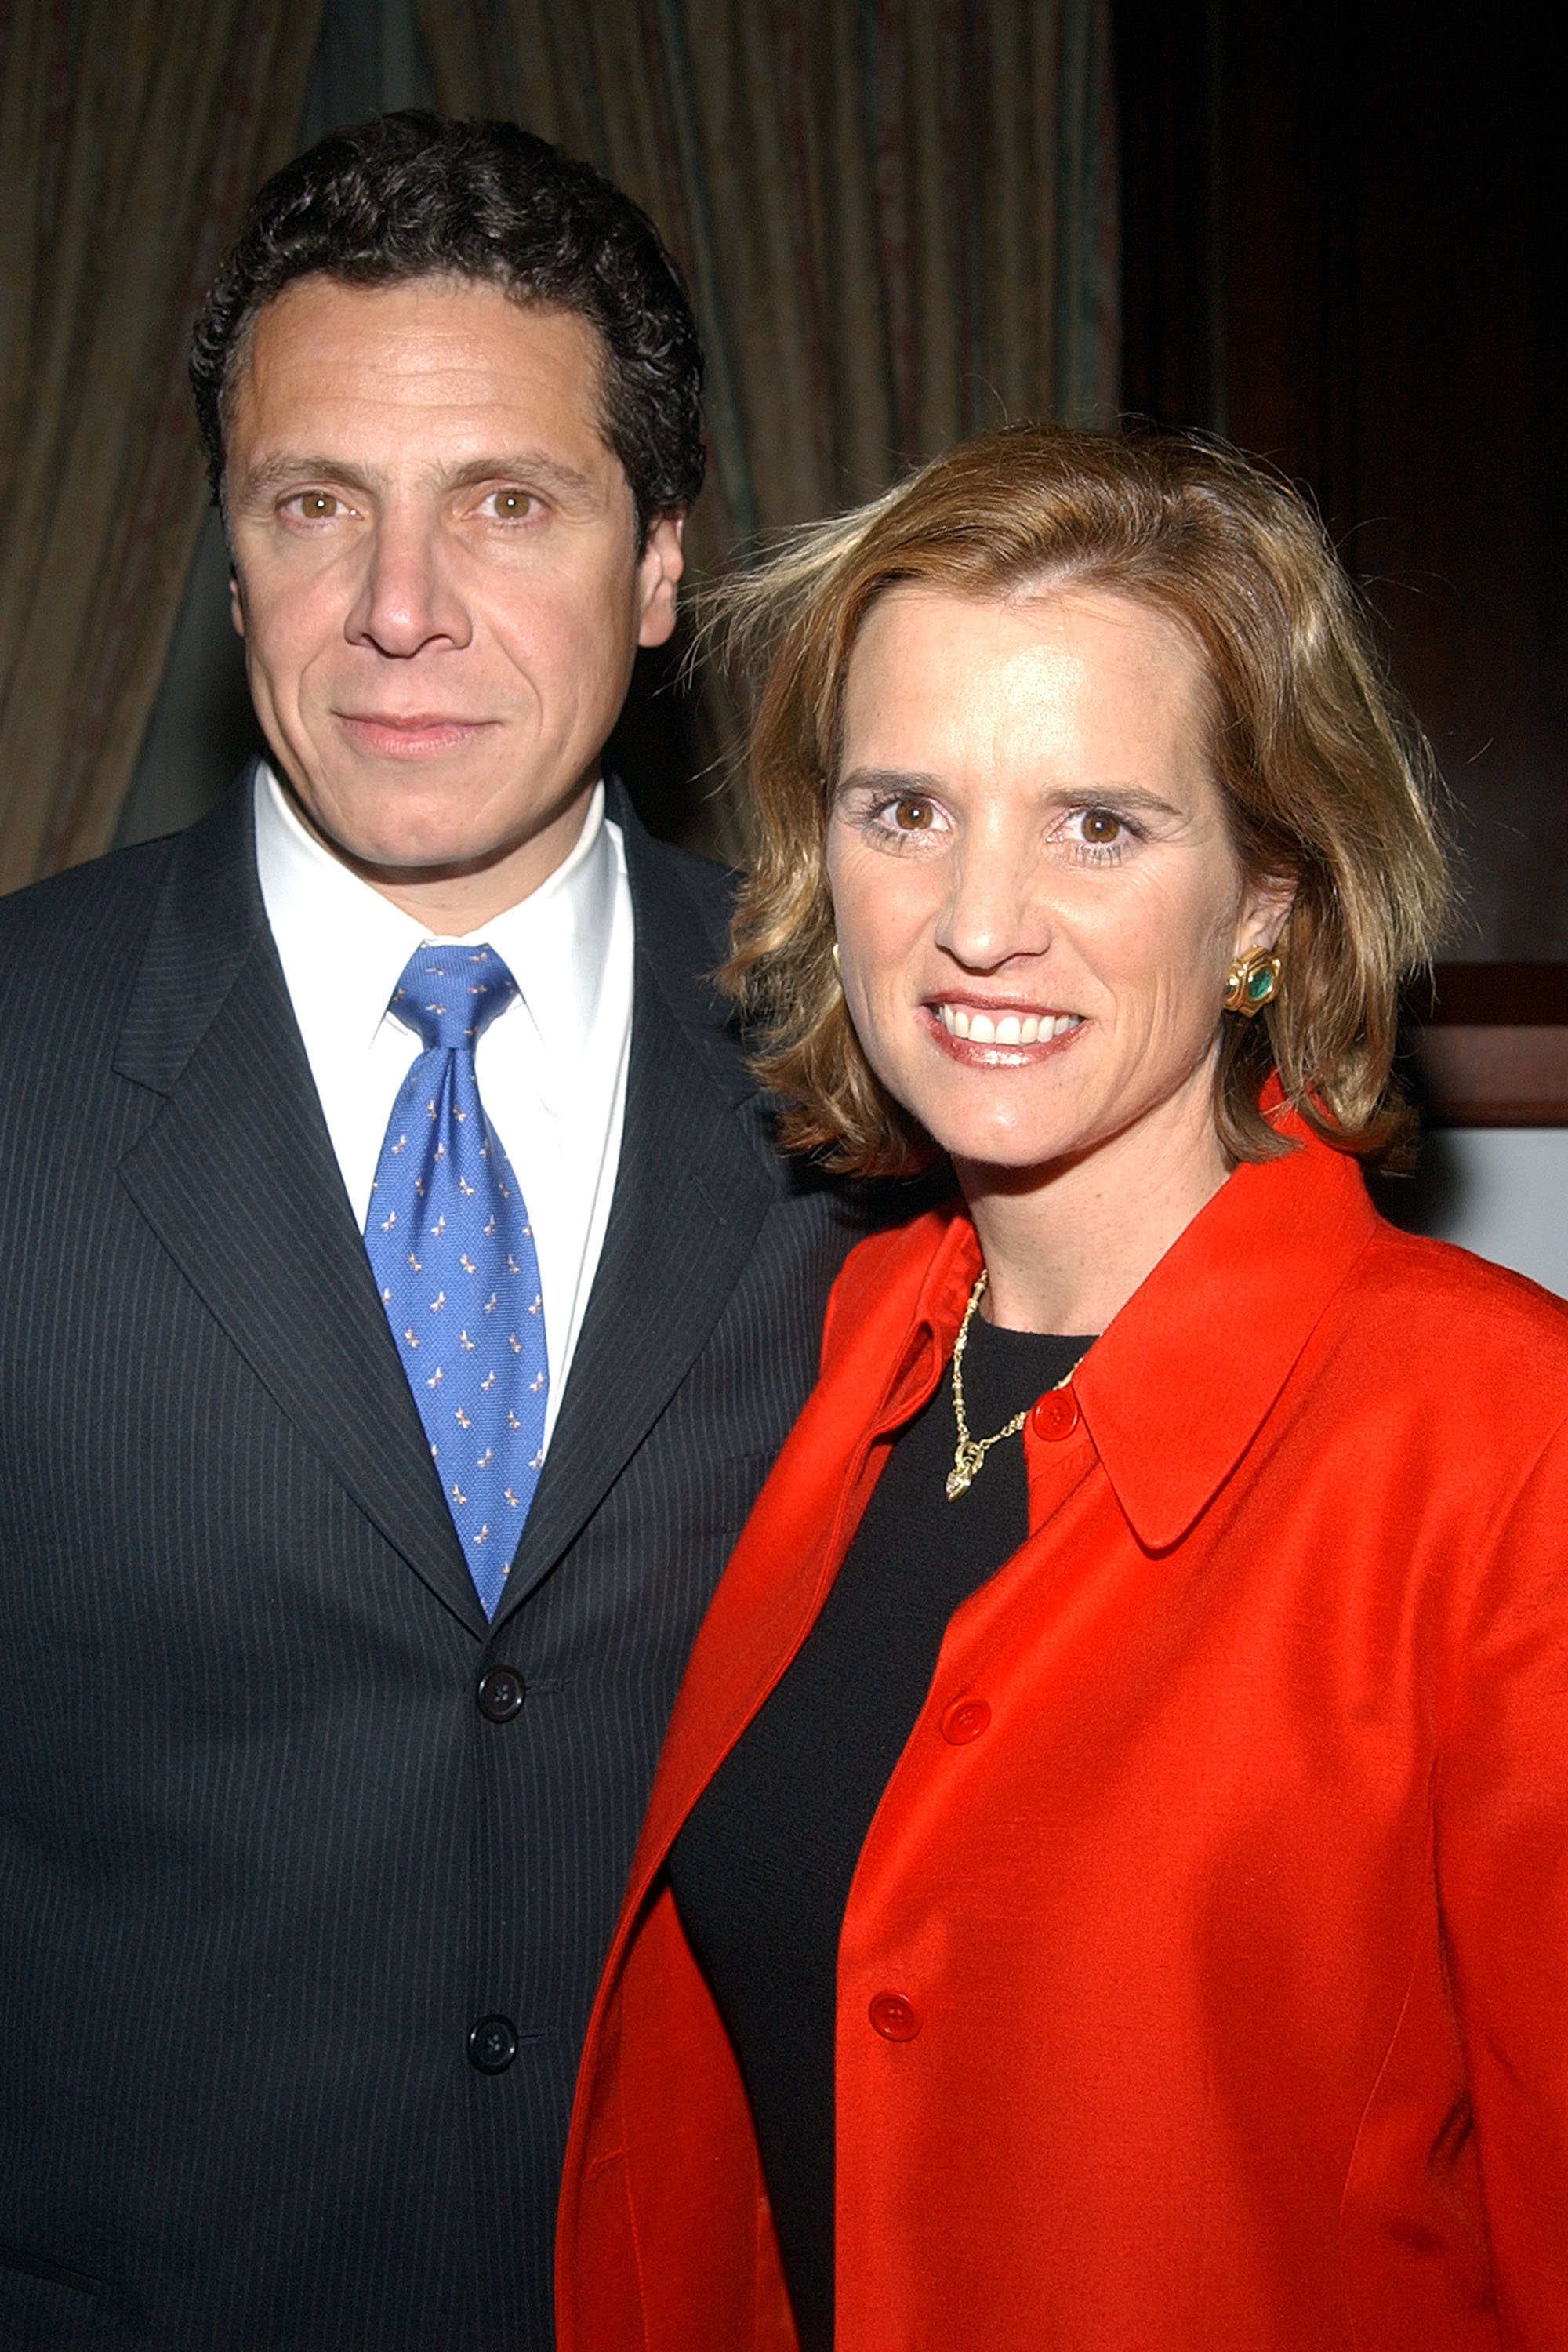 Is Andrew Cuomo Married? Does He Have a Wife, Girlfriend?